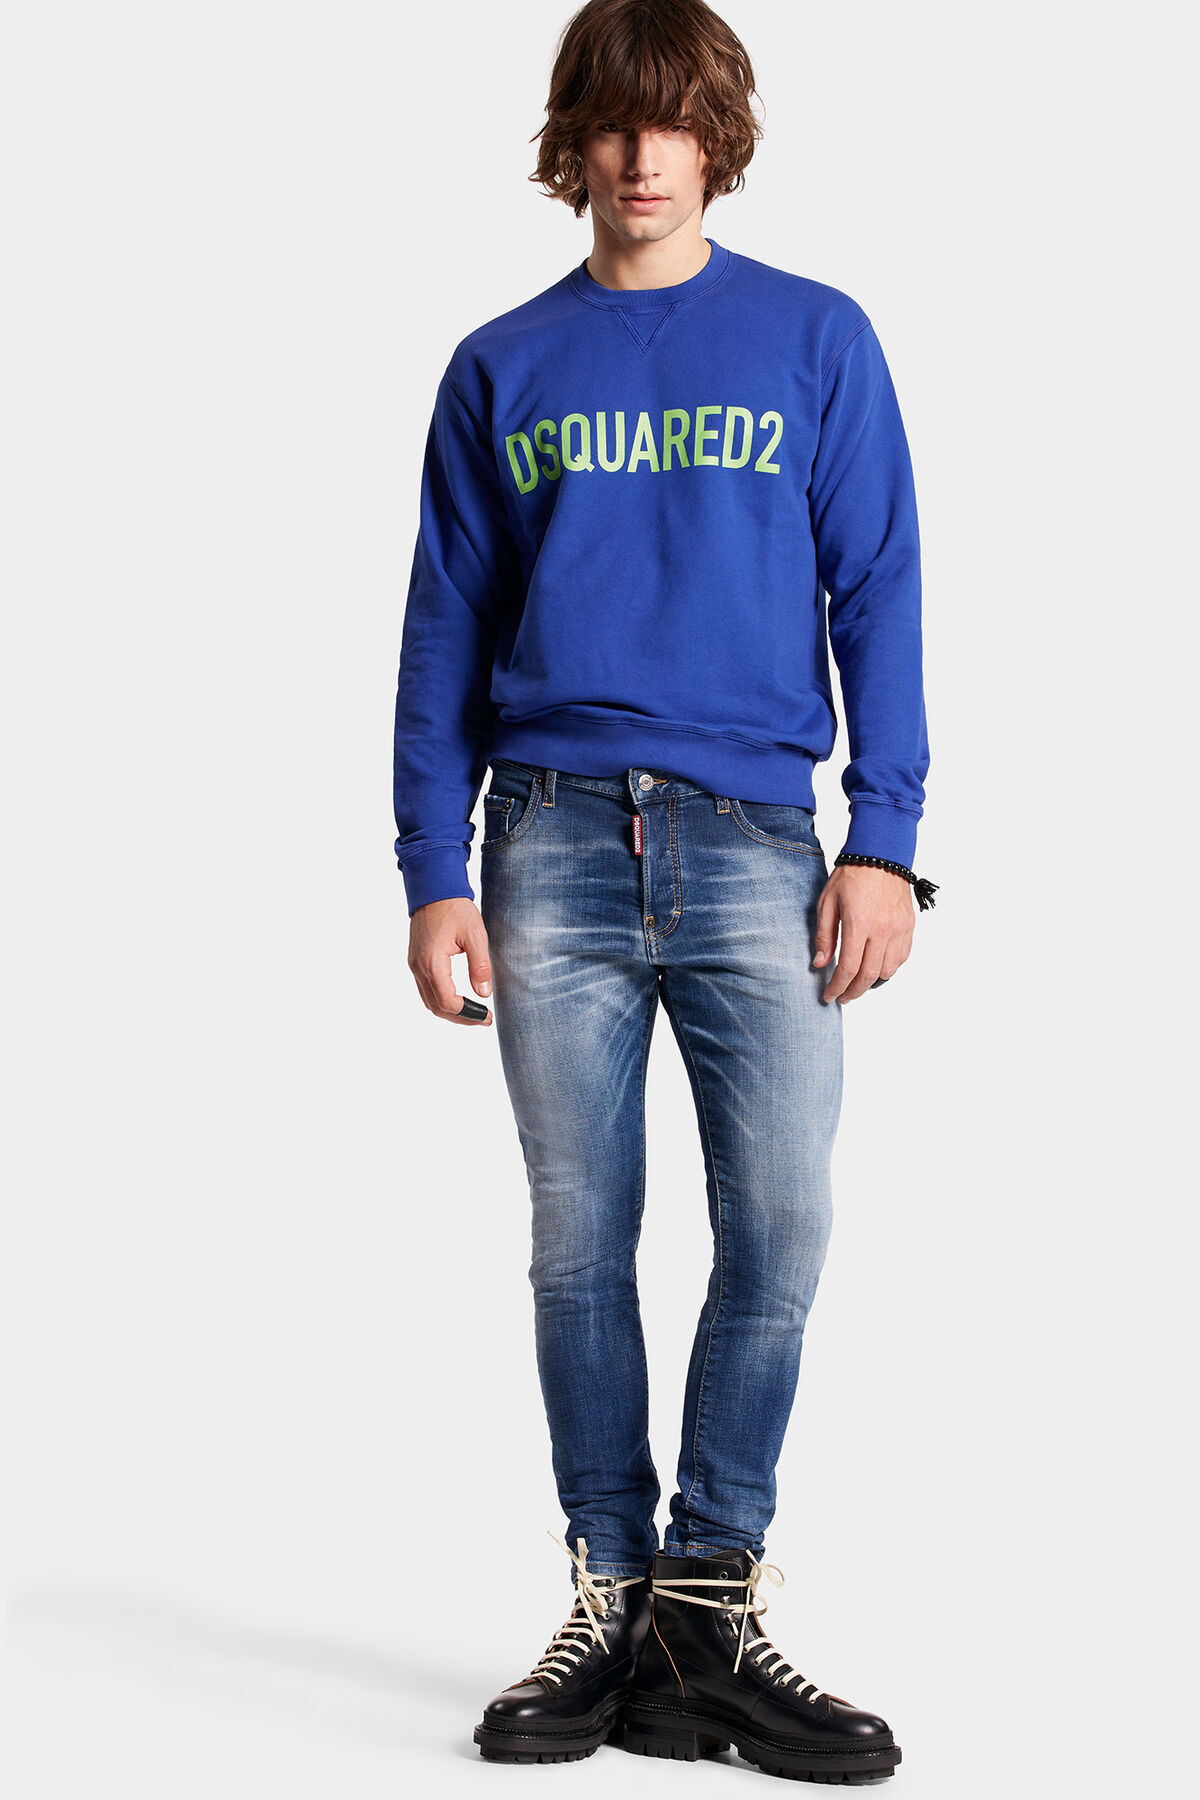 DSQUARED2 Jeans Skater in Washed Blue 46